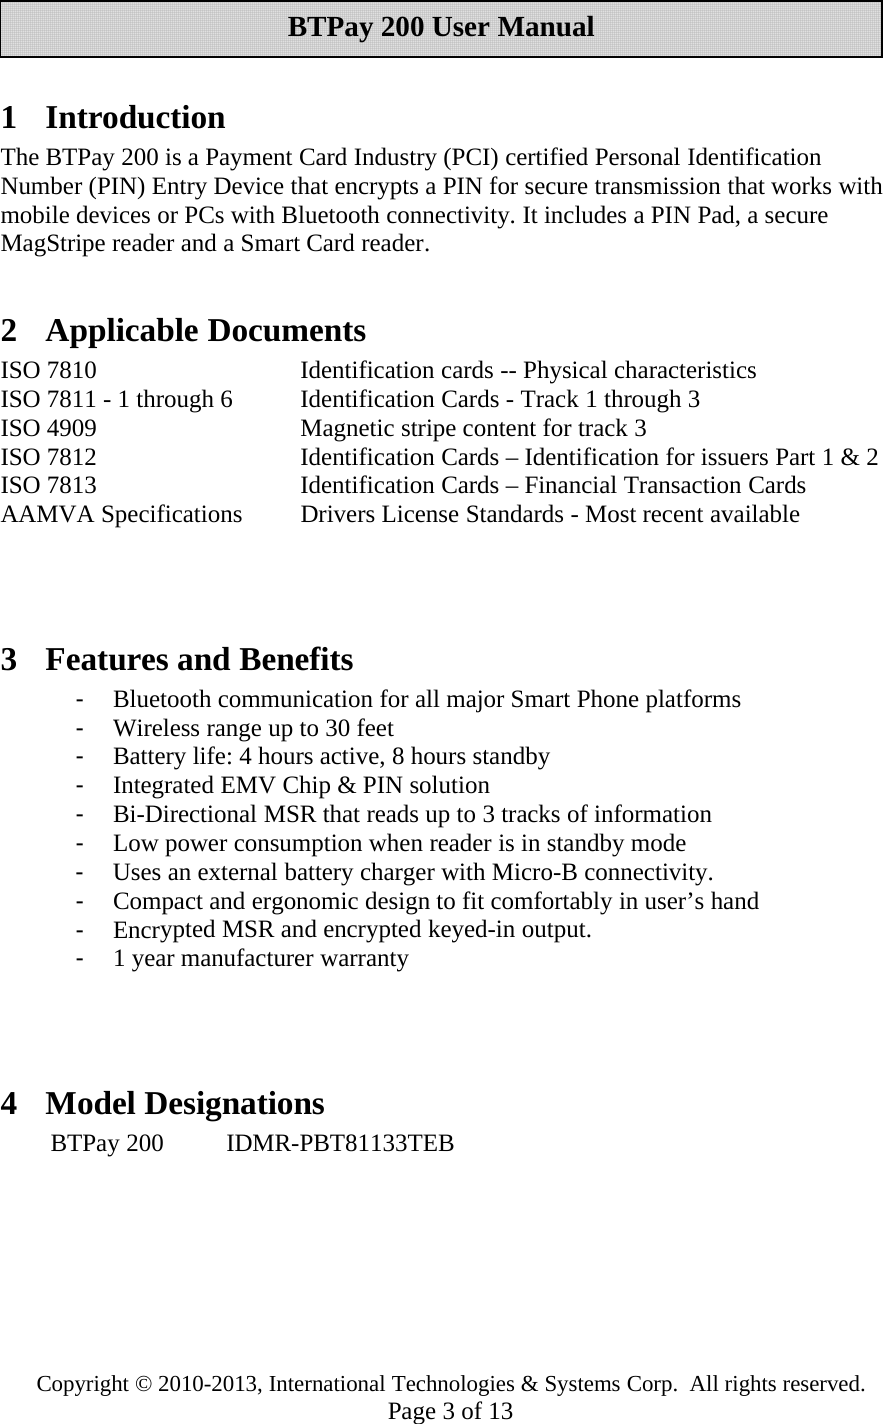 Copyright © 2010-2013, International Technologies &amp; Systems Corp. All rights reserved.Page 3of 13BTPay 200 User Manual1IntroductionThe BTPay 200 is a Payment Card Industry (PCI) certified Personal IdentificationNumber (PIN) Entry Device that encrypts a PIN for secure transmission that works withmobile devices or PCs with Bluetooth connectivity. It includes a PIN Pad, a secureMagStripe reader and a Smart Card reader.2 Applicable DocumentsISO 7810 Identification cards -- Physical characteristicsISO 7811 - 1 through 6 Identification Cards - Track 1 through 3ISO 4909 Magnetic stripe content for track 3ISO 7812 Identification Cards – Identification for issuers Part 1 &amp; 2ISO 7813 Identification Cards – Financial Transaction CardsAAMVA Specifications Drivers License Standards - Most recent available3 Features and Benefits-Bluetooth communication for all major Smart Phone platforms-Wireless rangeupto30feet-Batterylife: 4 hours active, 8 hours standby-Integrated EMV Chip &amp; PIN solution-Bi-Directional MSR that reads up to 3 tracks of information-Low powerconsumption when readeris in standby mode-Uses an externalbatterychargerwith Micro-B connectivity.-Compact and ergonomic design to fit comfortablyin user’s hand-EncryptedMSR andencrypted keyed-in output.-1yearmanufacturer warranty4 Model DesignationsBTPay 200 IDMR-PBT81133TEB